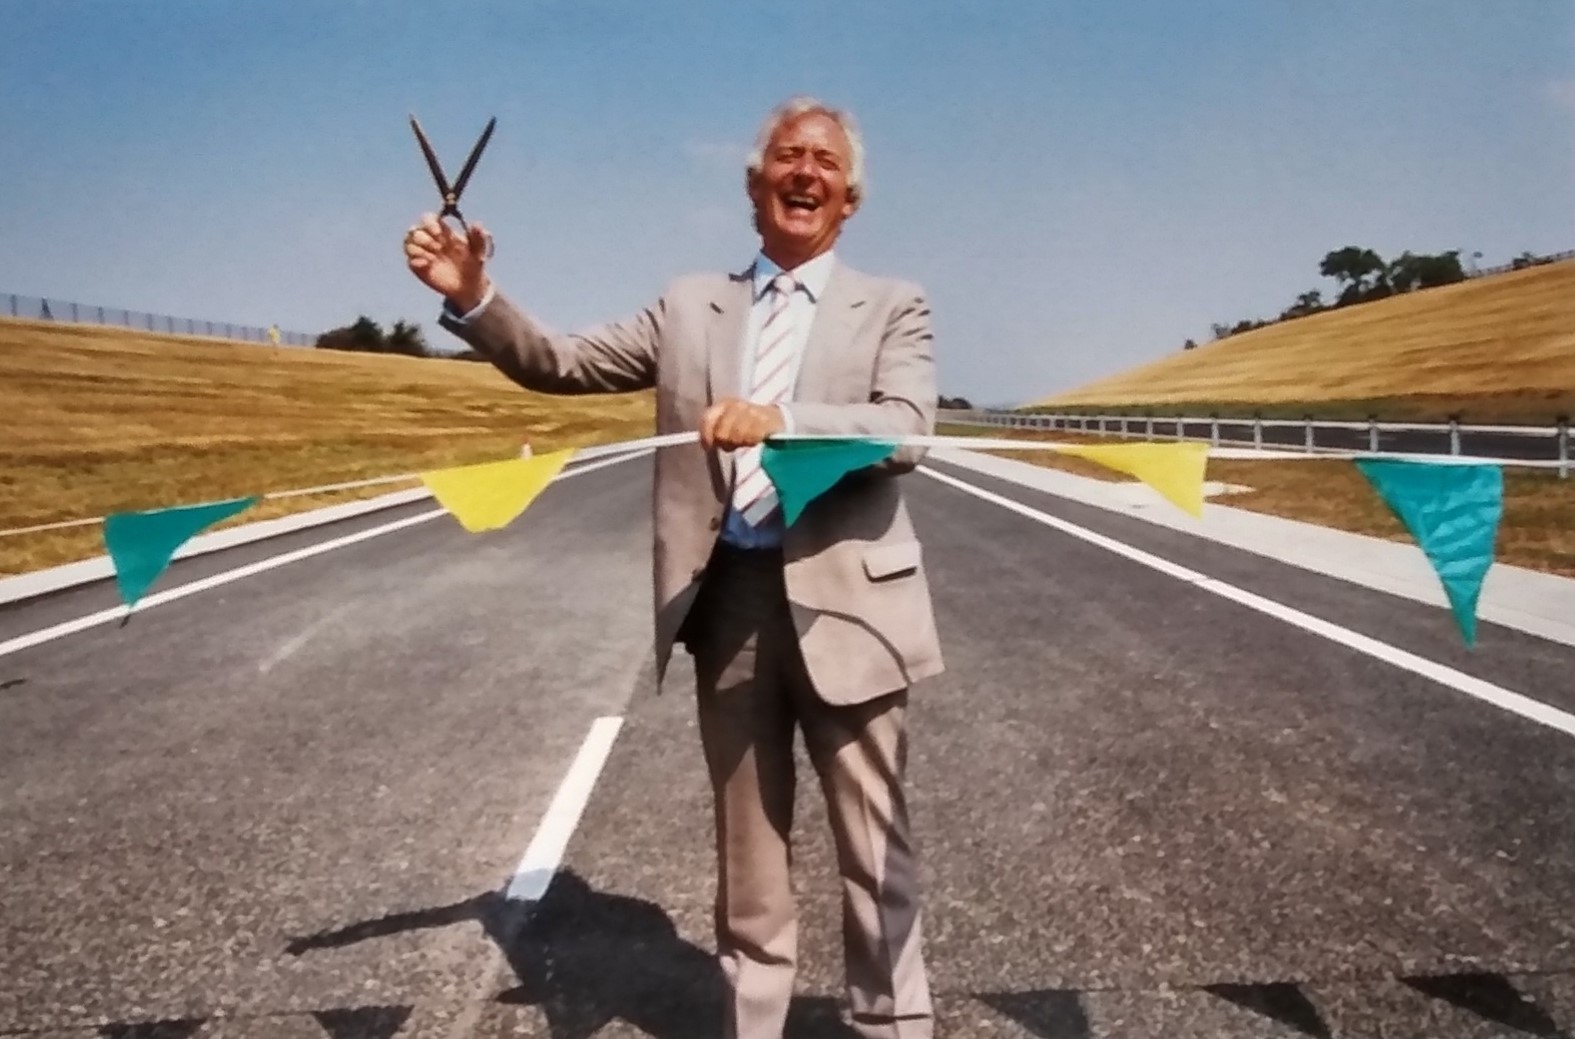 MP Michael Spicer cuts the ribbon to officially open the latest stage of the A46 trunk road in August 1995